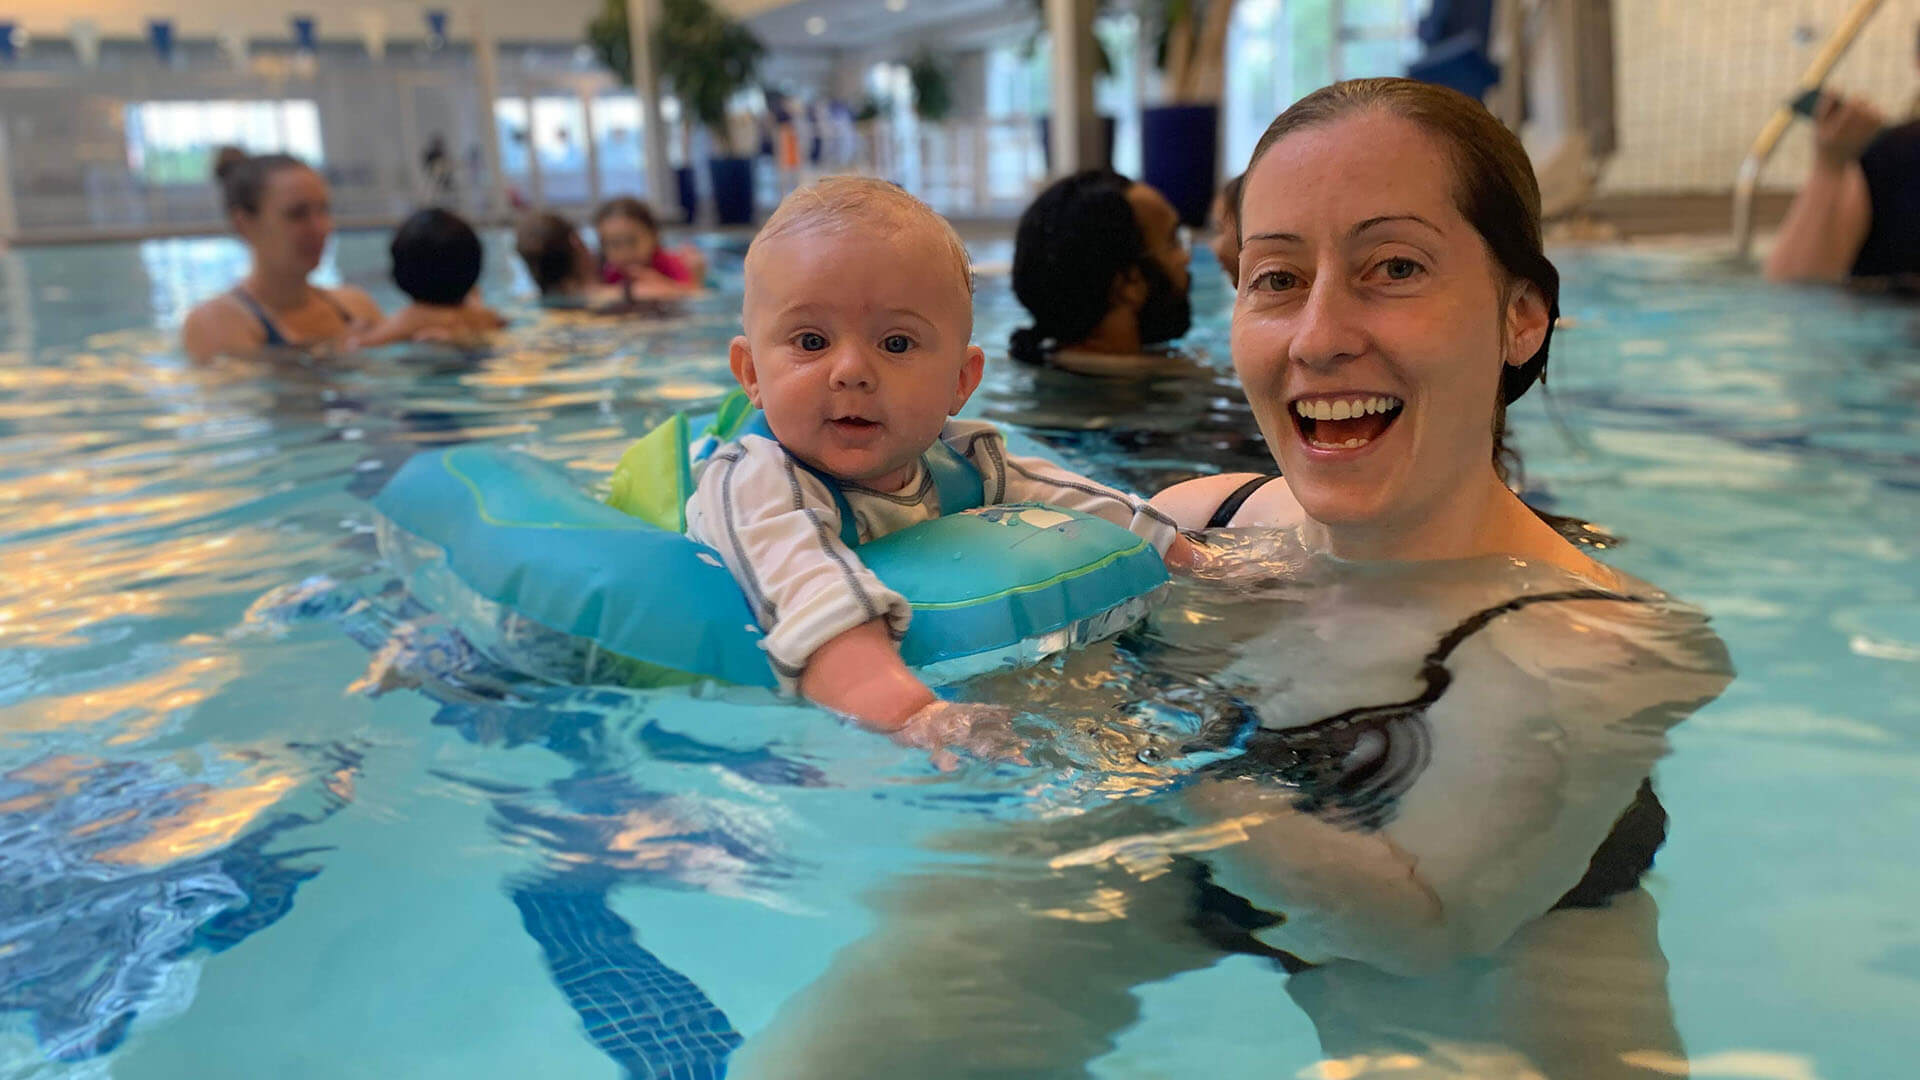 Laura smiles in a pool while holding her now 3-year-old son.